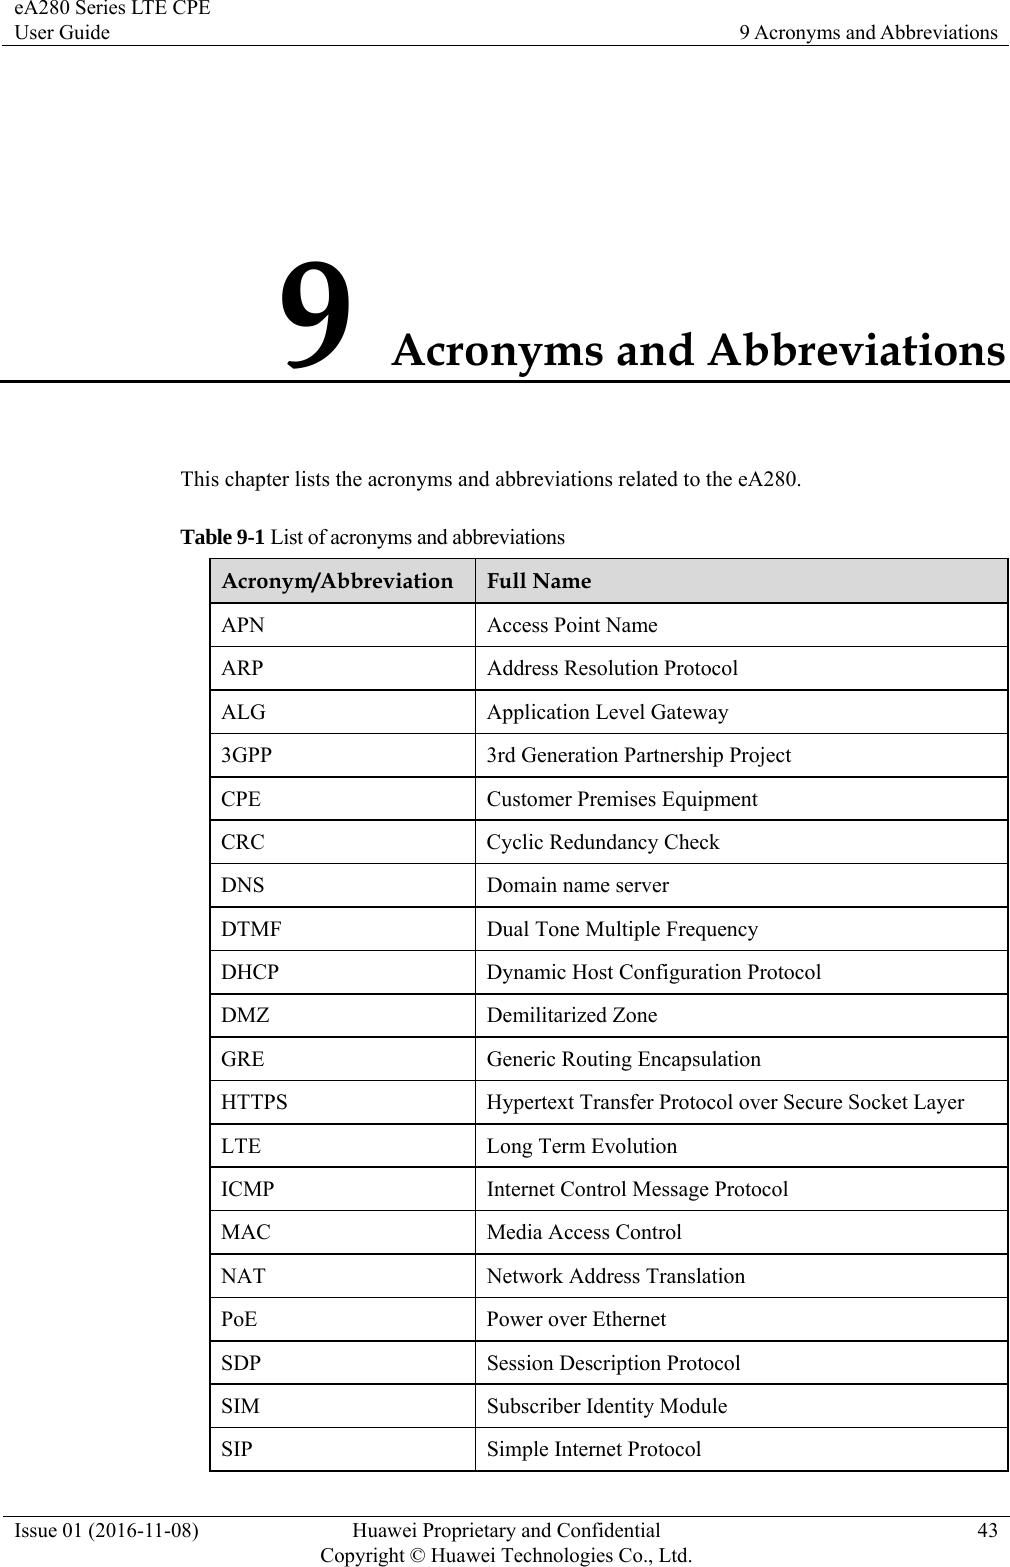 eA280 Series LTE CPE User Guide  9 Acronyms and Abbreviations Issue 01 (2016-11-08)  Huawei Proprietary and Confidential         Copyright © Huawei Technologies Co., Ltd.43 9 Acronyms and Abbreviations This chapter lists the acronyms and abbreviations related to the eA280. Table 9-1 List of acronyms and abbreviations Acronym/Abbreviation  Full Name APN Access Point Name ARP  Address Resolution Protocol ALG  Application Level Gateway 3GPP  3rd Generation Partnership Project CPE  Customer Premises Equipment CRC Cyclic Redundancy Check DNS  Domain name server DTMF  Dual Tone Multiple Frequency DHCP  Dynamic Host Configuration Protocol DMZ Demilitarized Zone GRE Generic Routing Encapsulation HTTPS  Hypertext Transfer Protocol over Secure Socket Layer LTE  Long Term Evolution ICMP Internet Control Message Protocol MAC  Media Access Control NAT  Network Address Translation PoE Power over Ethernet SDP  Session Description Protocol SIM  Subscriber Identity Module SIP  Simple Internet Protocol 